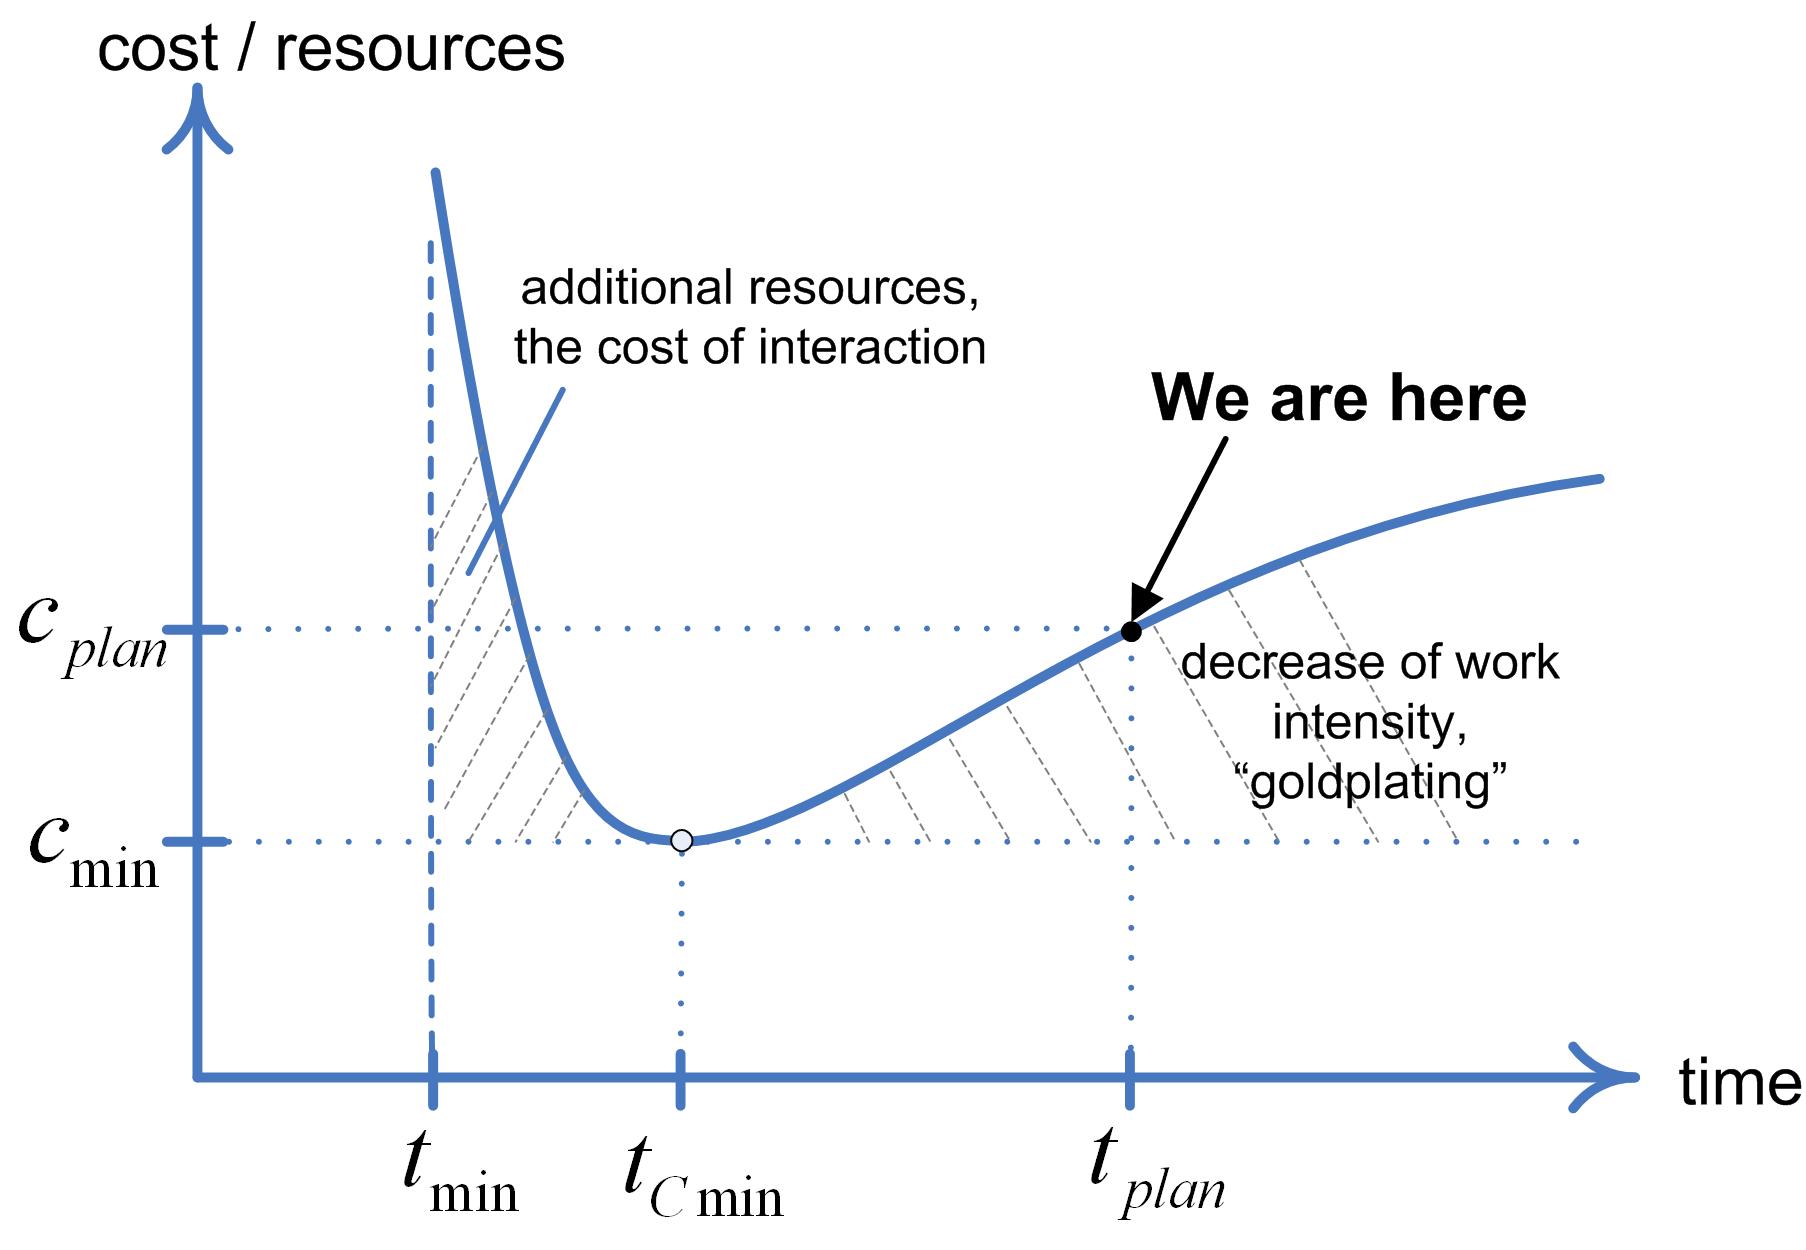 Relationship of cost and time